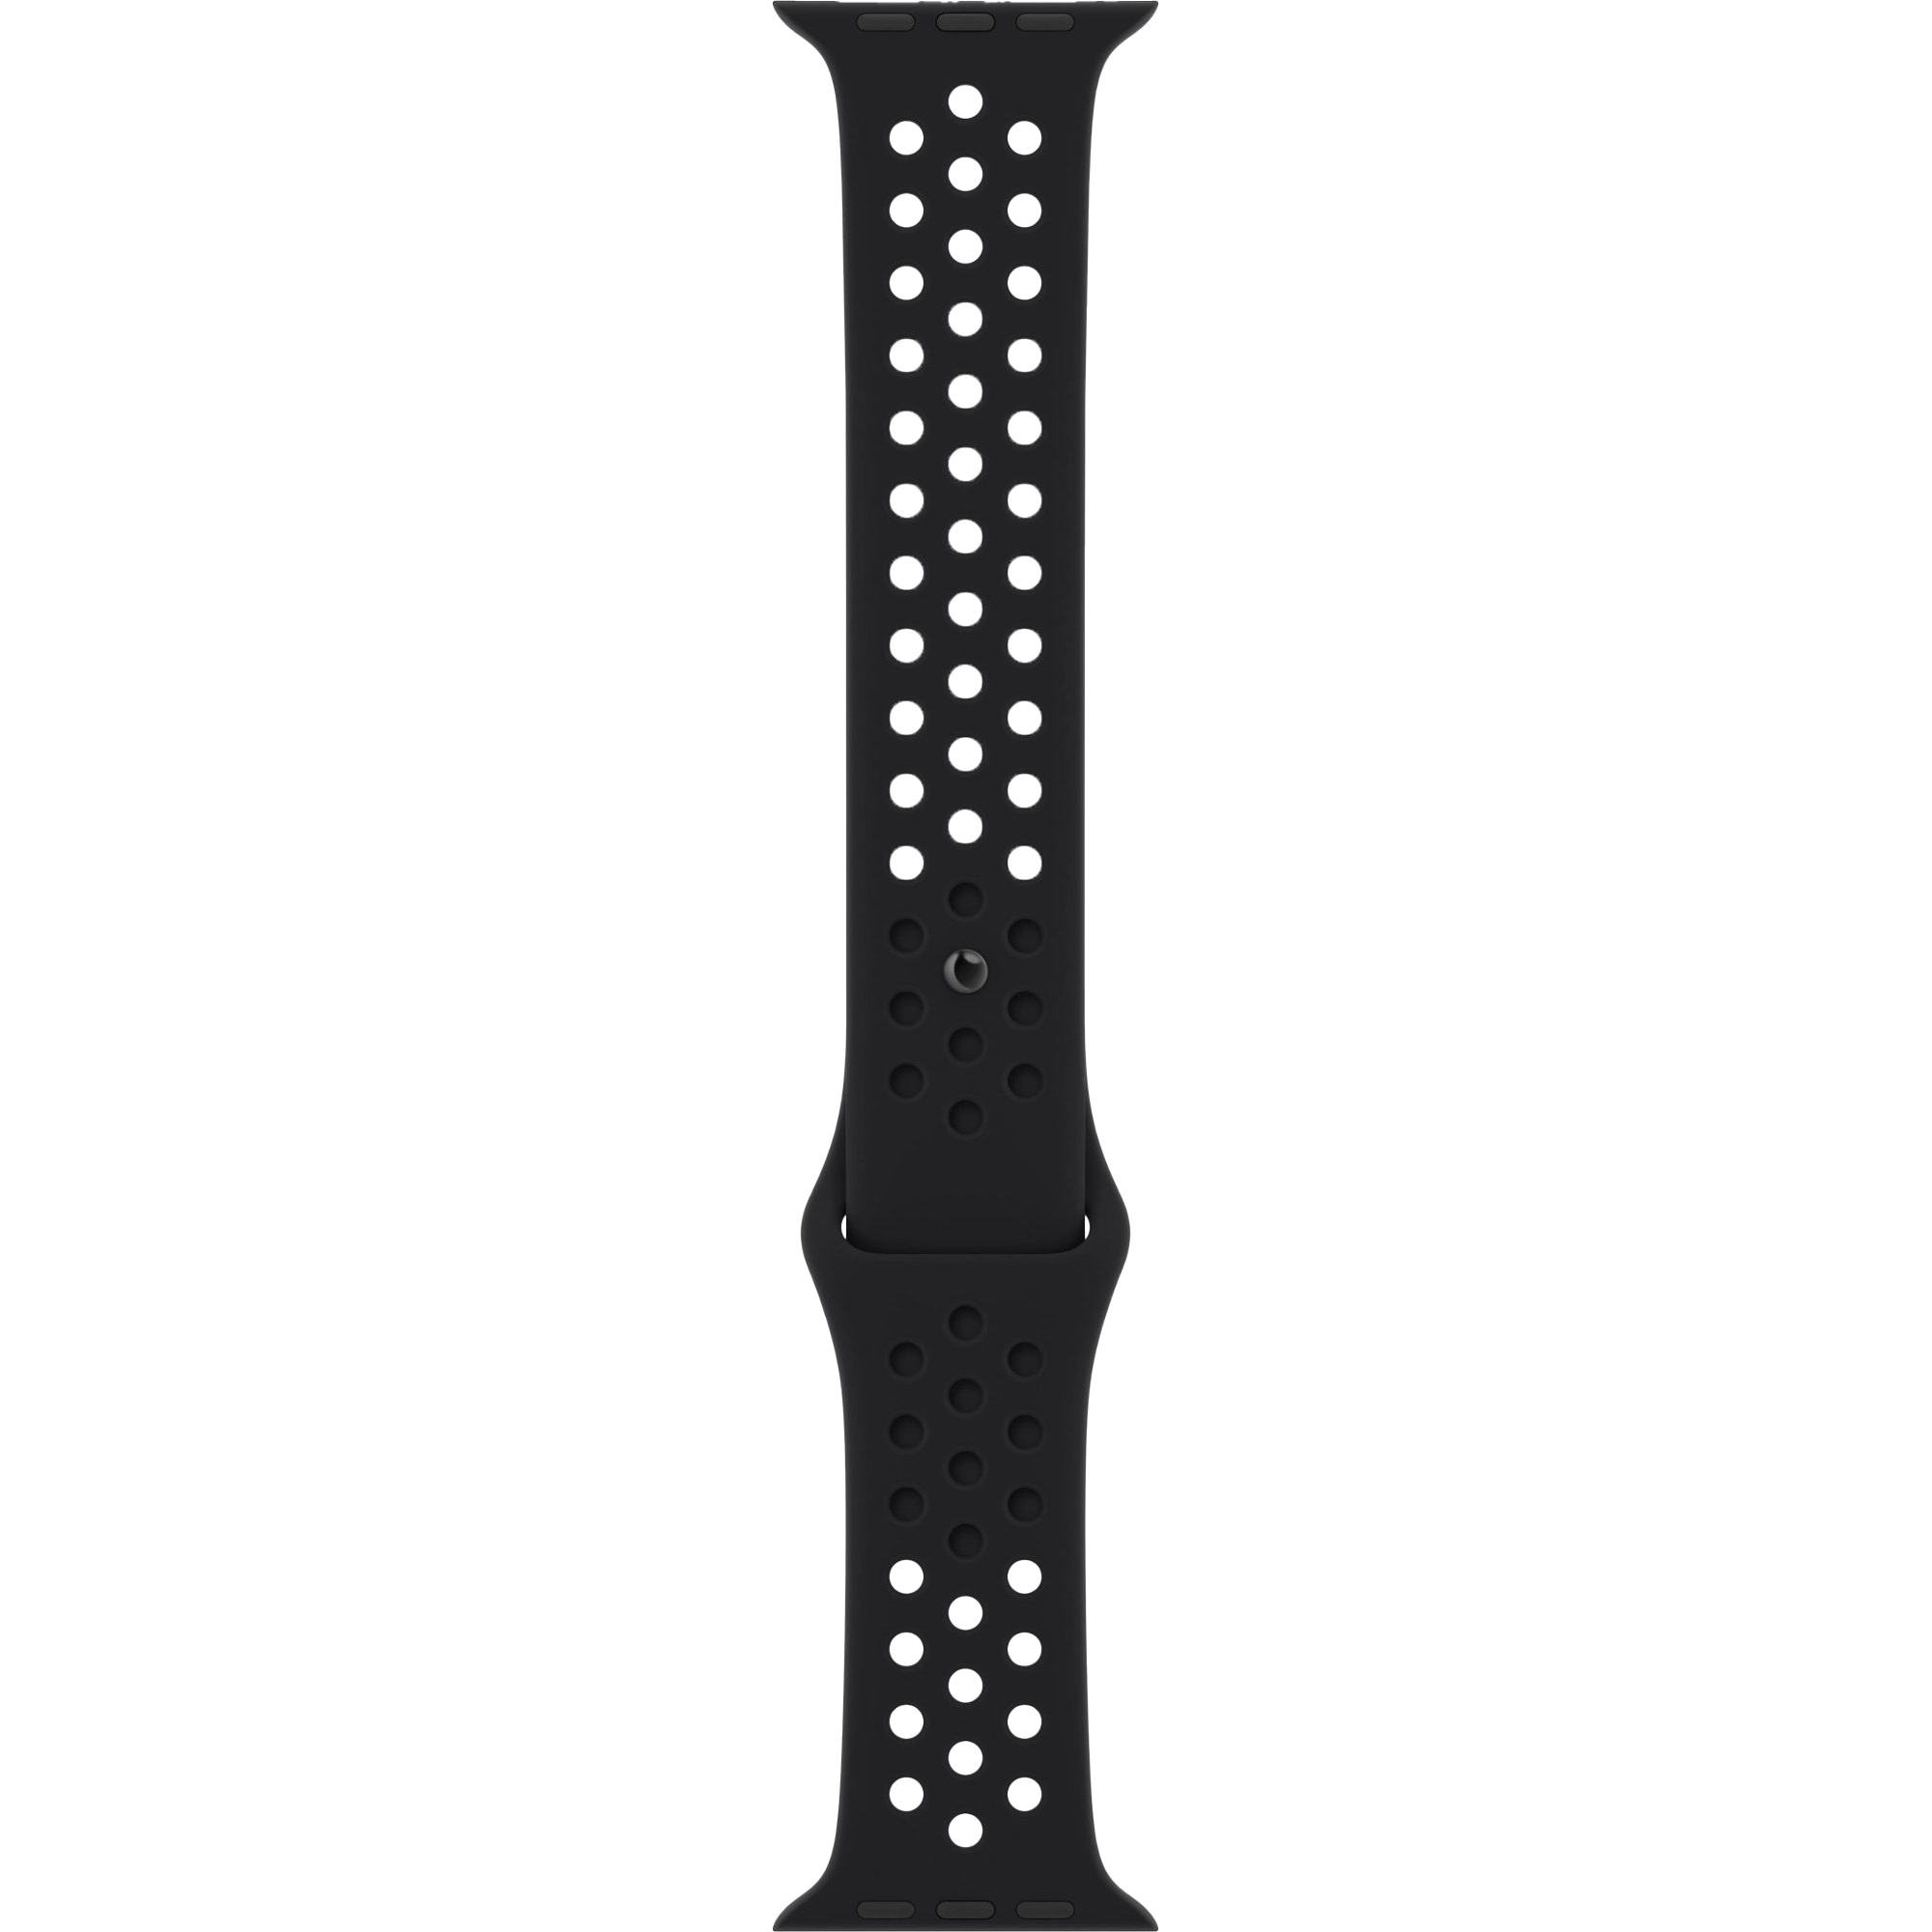 Nike Sport Band for Apple Watch